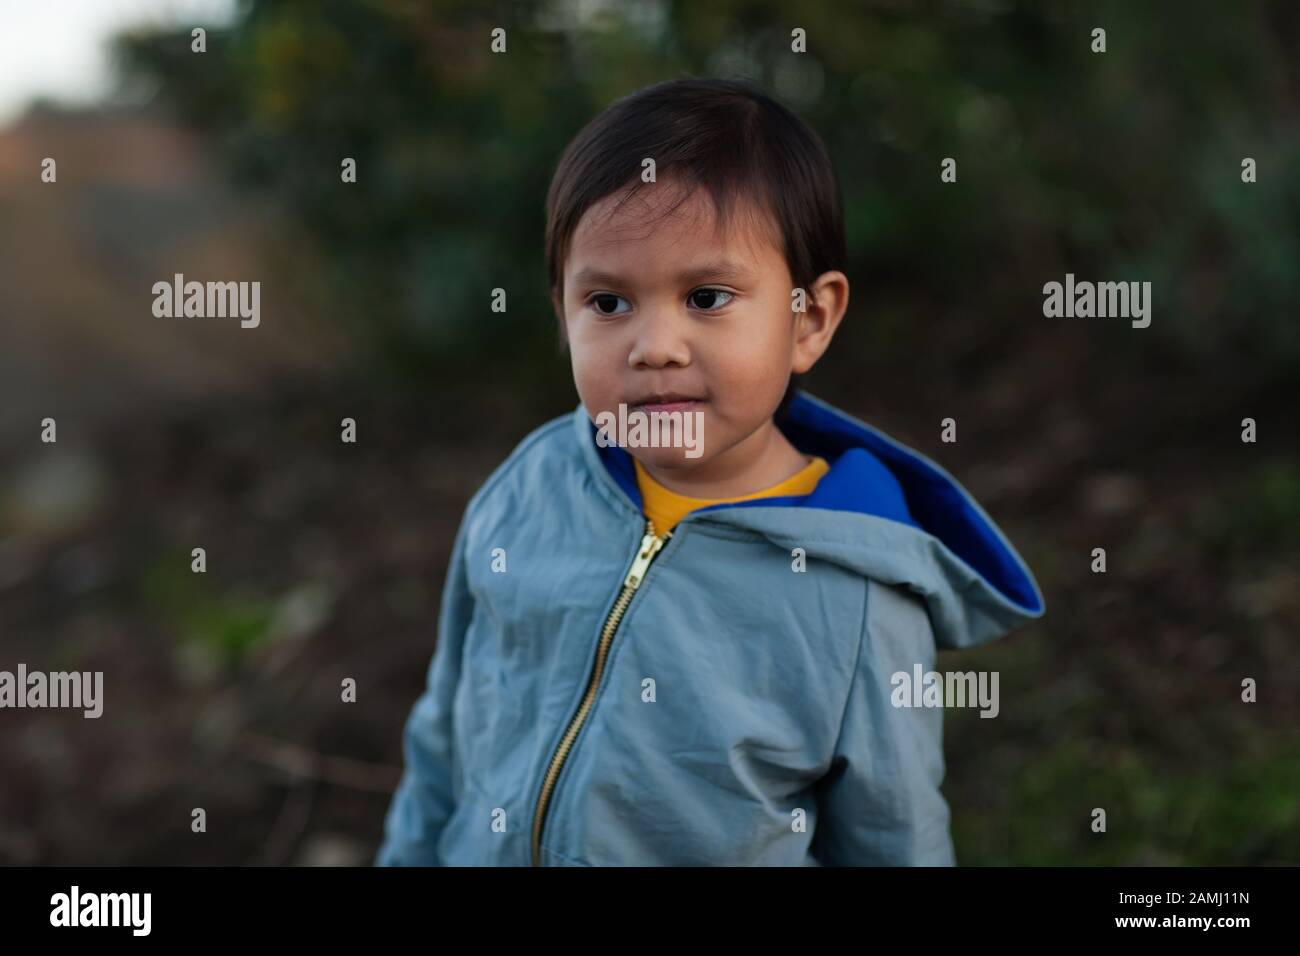 A little boy wearing a hoodie jacket and with an inquisitive facial expression while on a hiking trail. Stock Photo